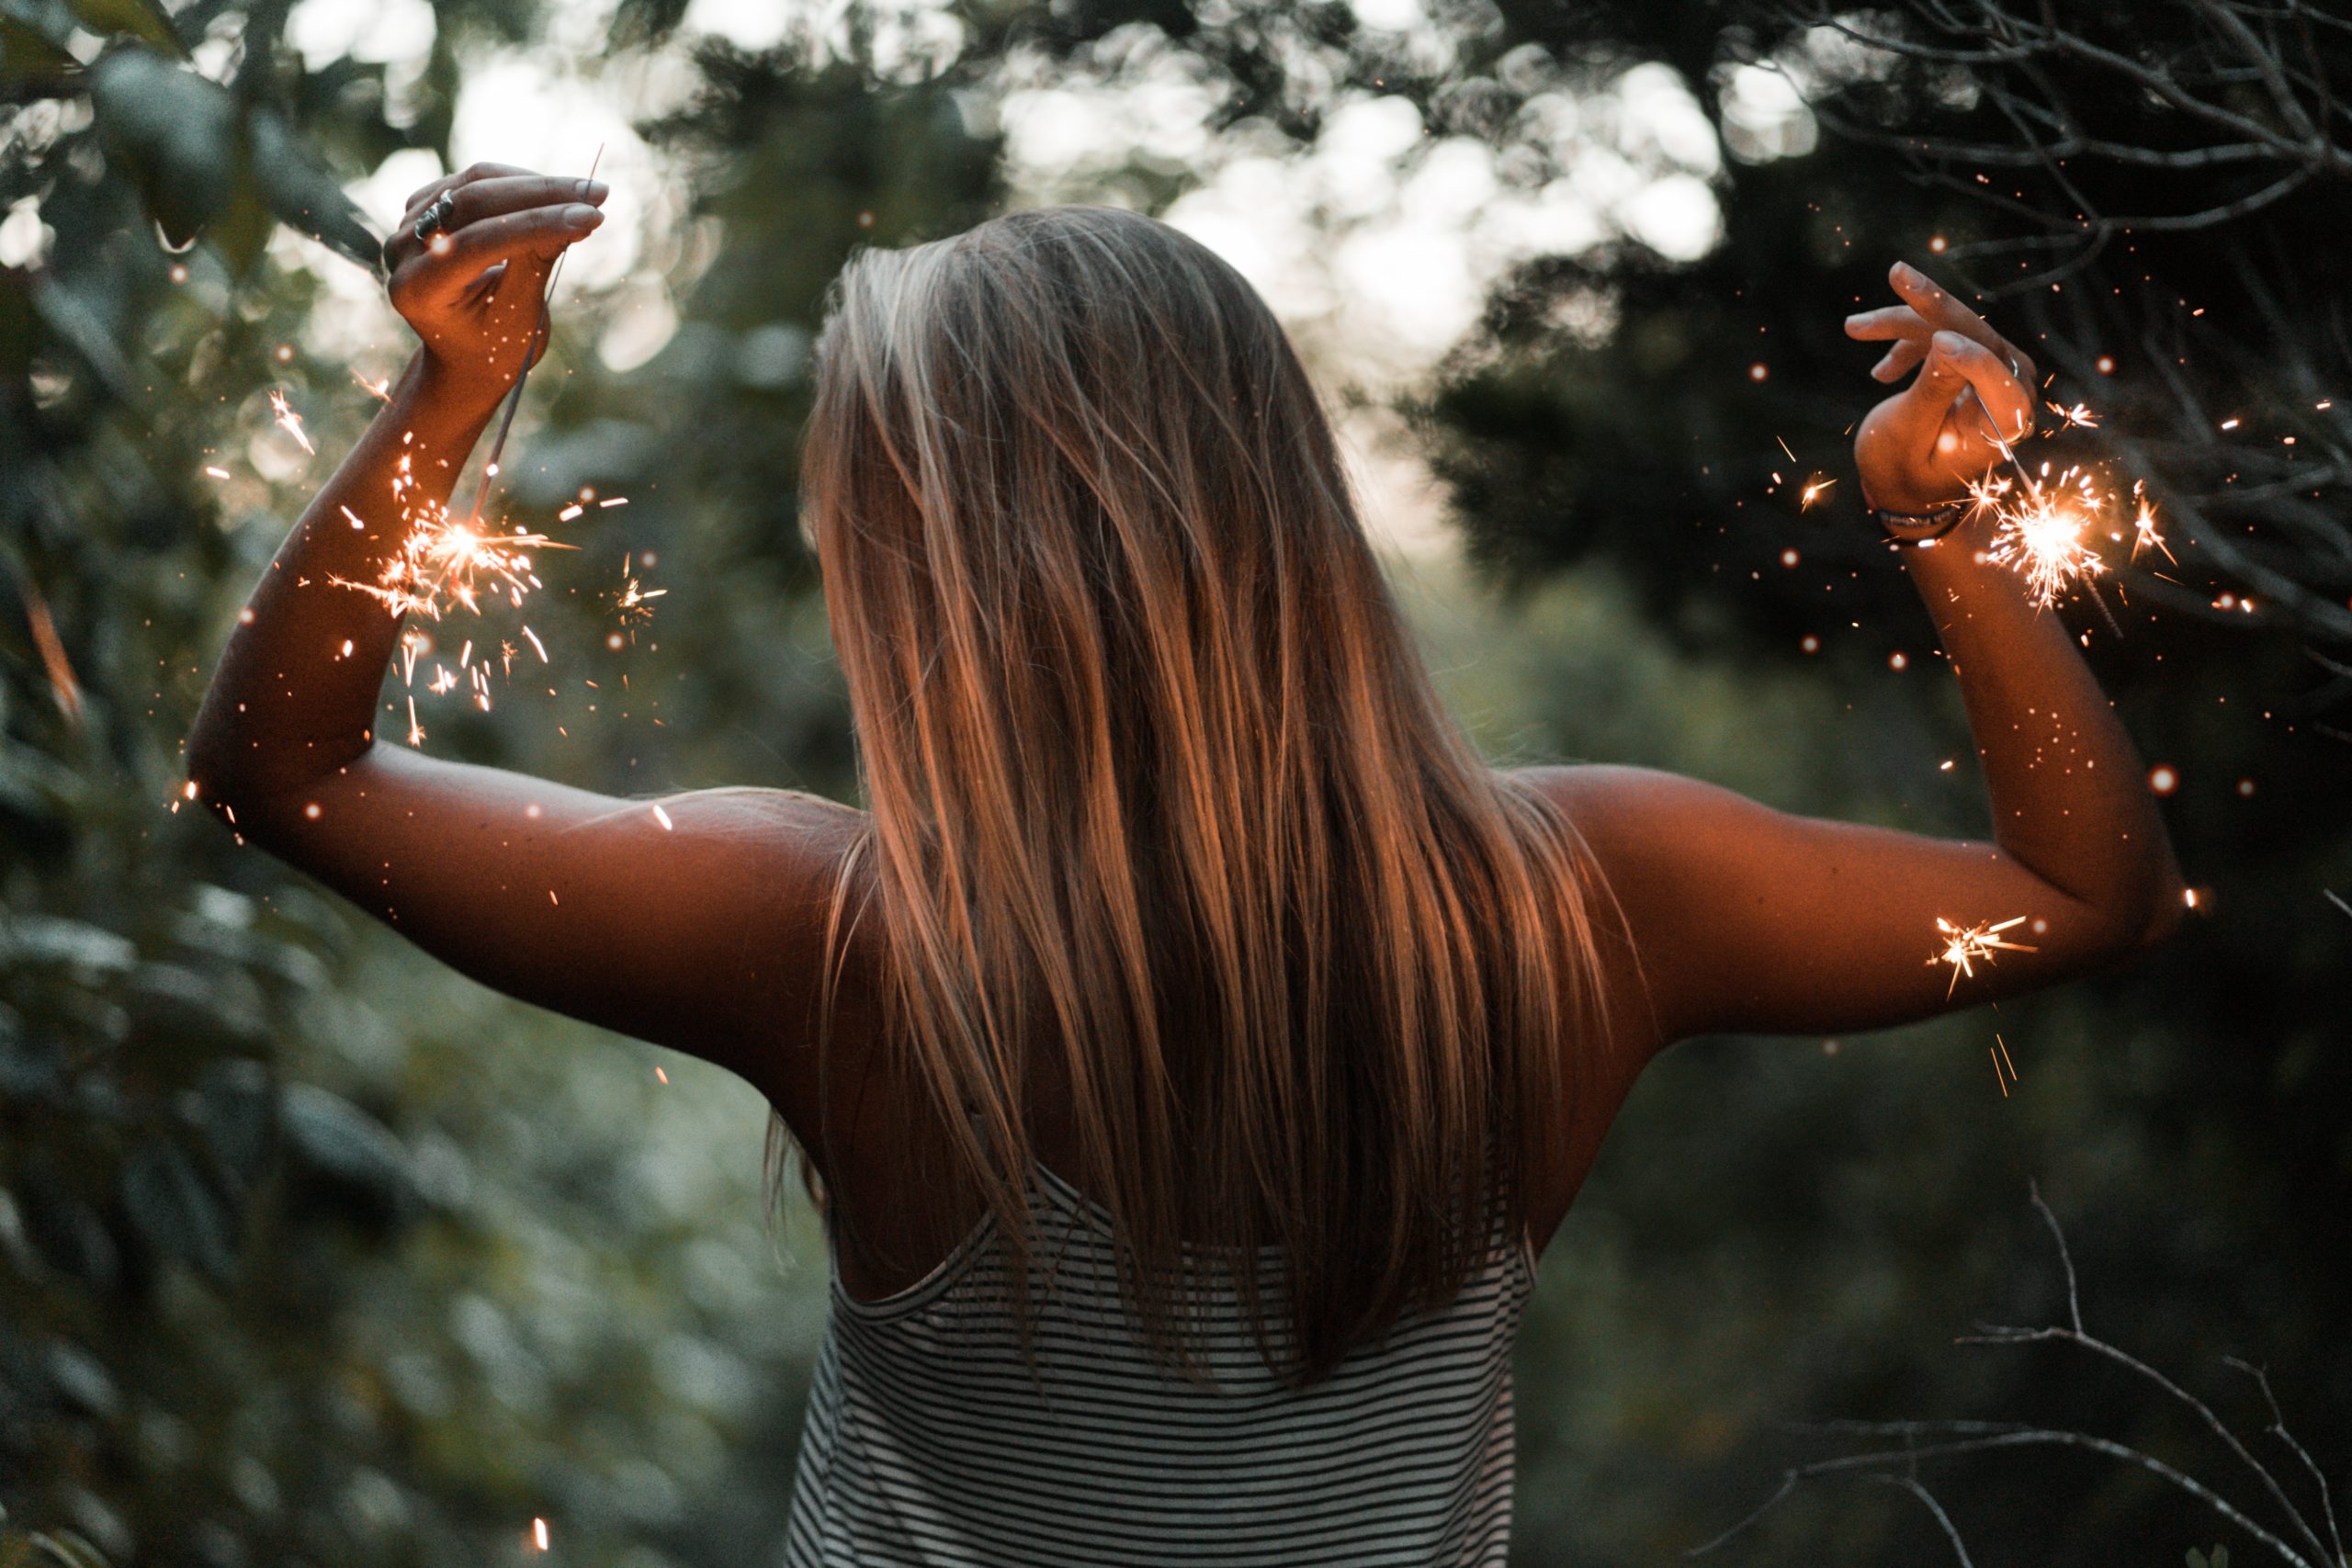 A woman with long hair standing with her back to you in a forest clearing holding a sparkler in each hand